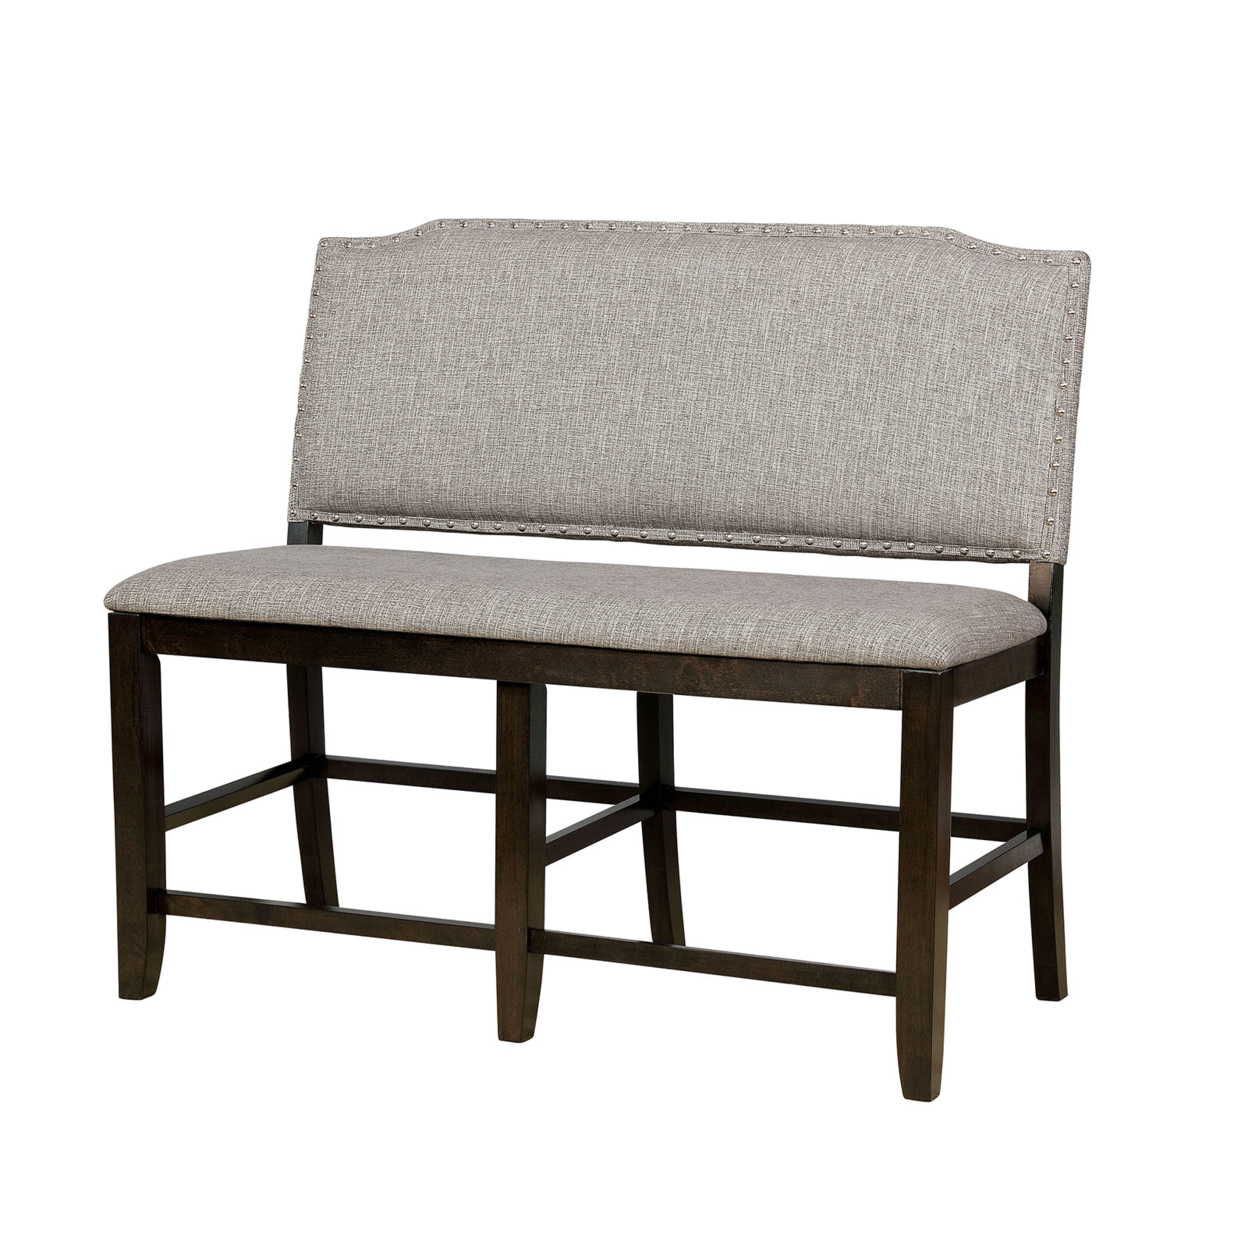 Fabric Upholstered Wooden Counter Height Bench, Gray And Brown- Saltoro Sherpi